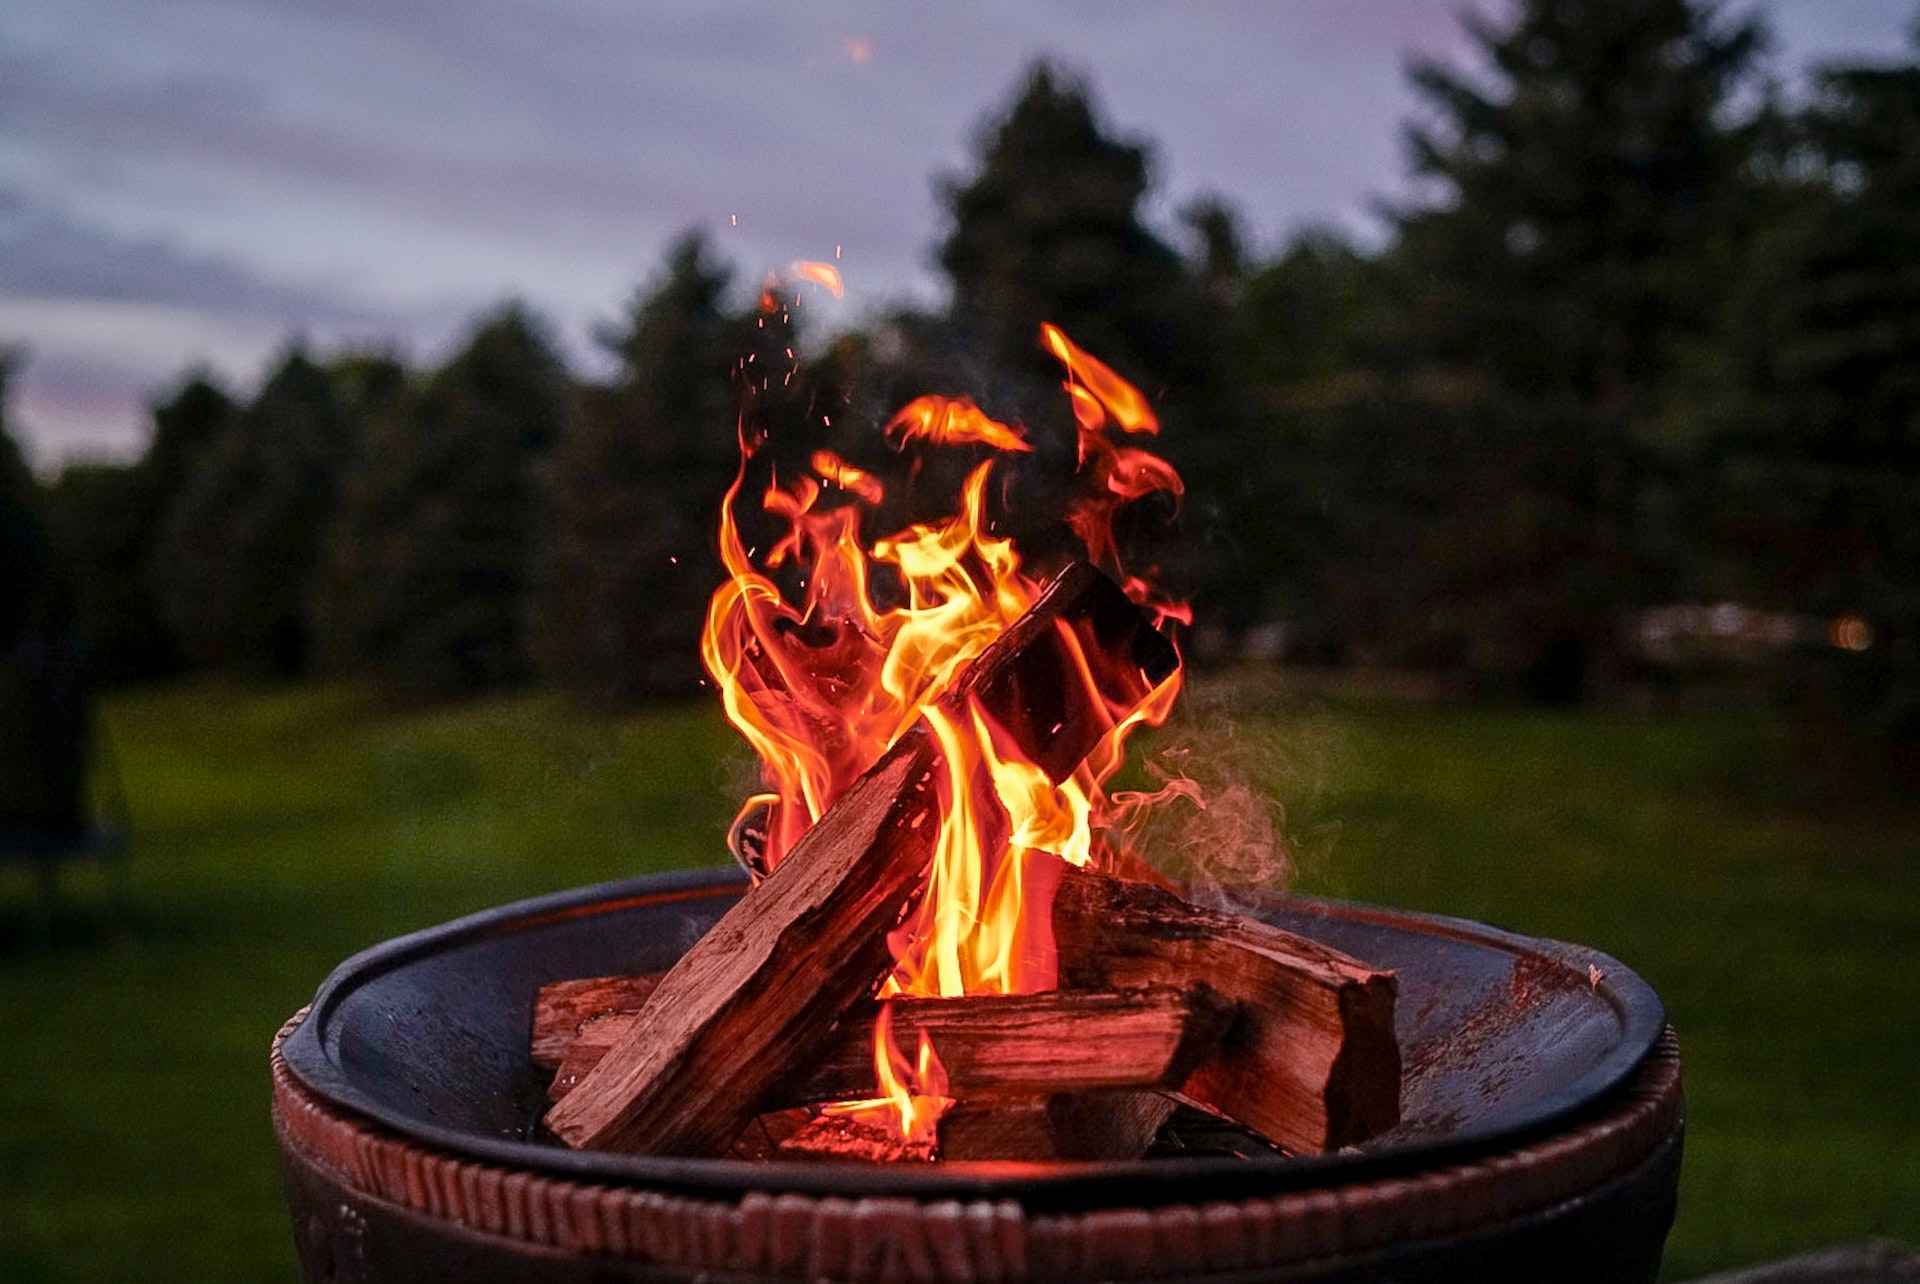 Fire pit burning, with trees in background